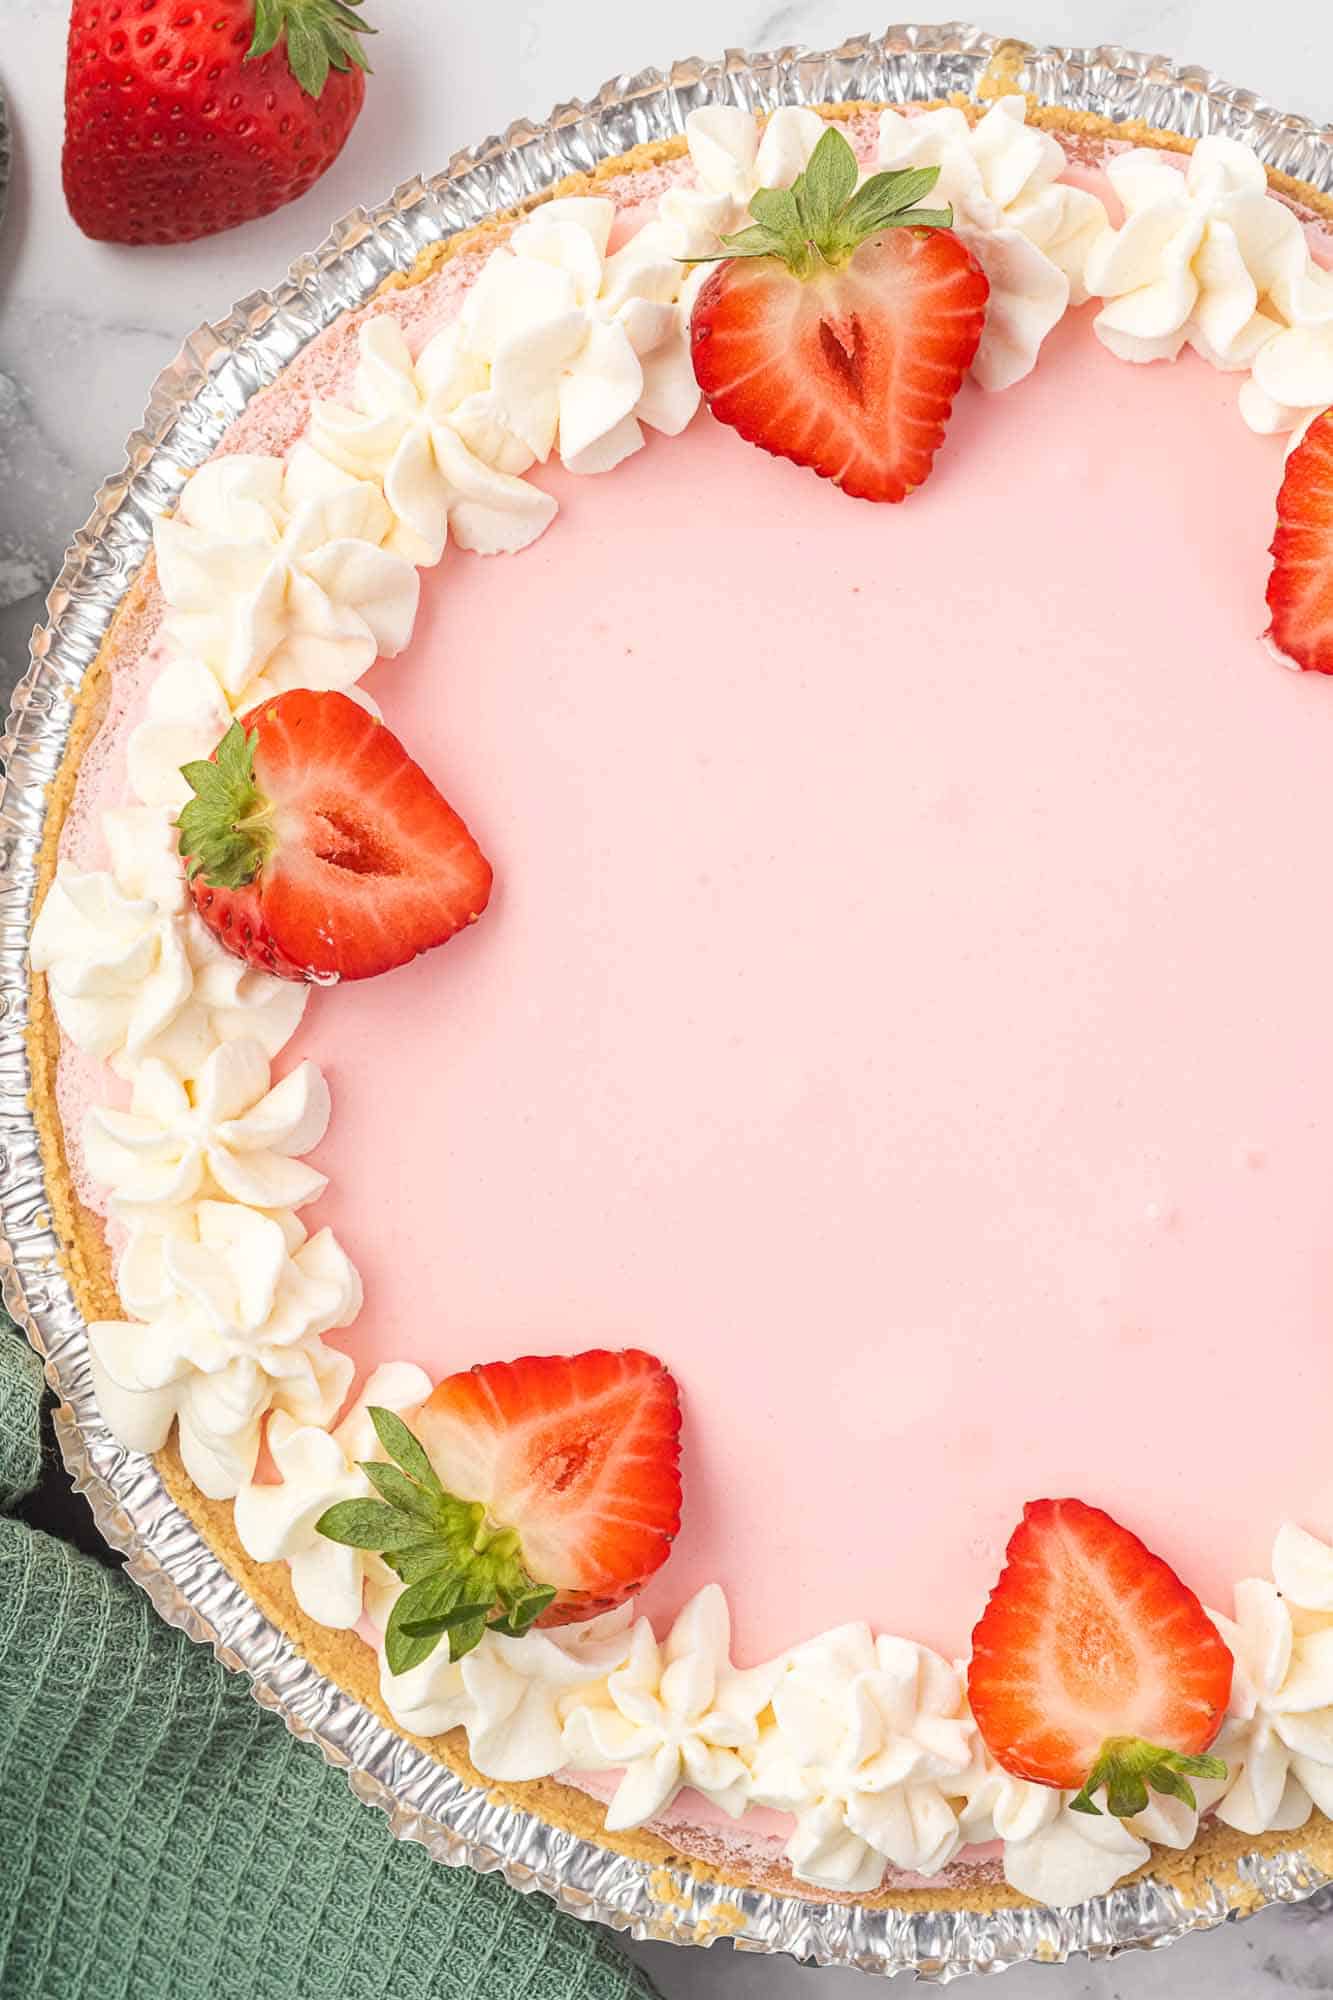 a whole no bake strawberry pie viewed from above. Whipped cream and strawberries garnish the edge of the pie.